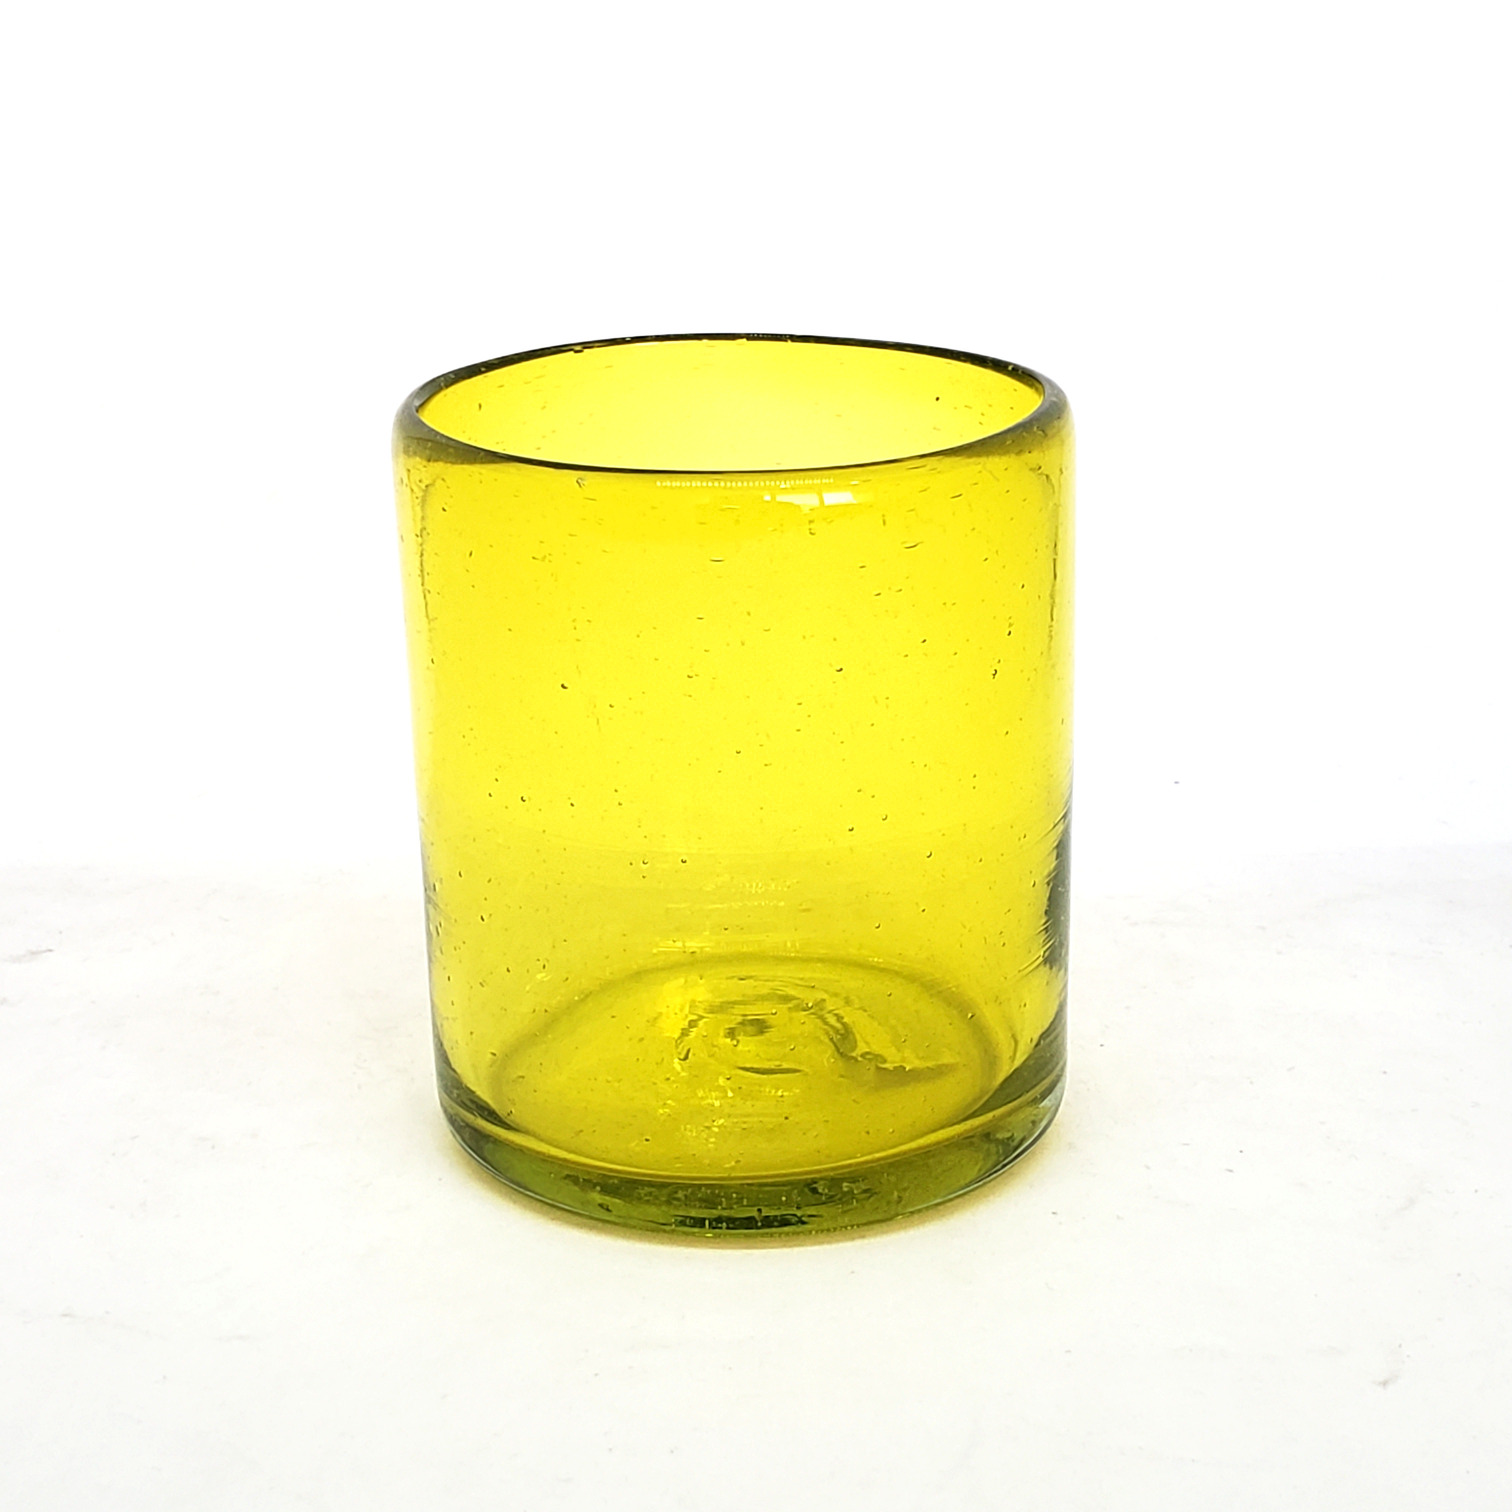 Wholesale MEXICAN GLASSWARE / Solid Yellow 9 oz Short Tumblers  / Enhance your favorite drink with these colorful handcrafted glasses.